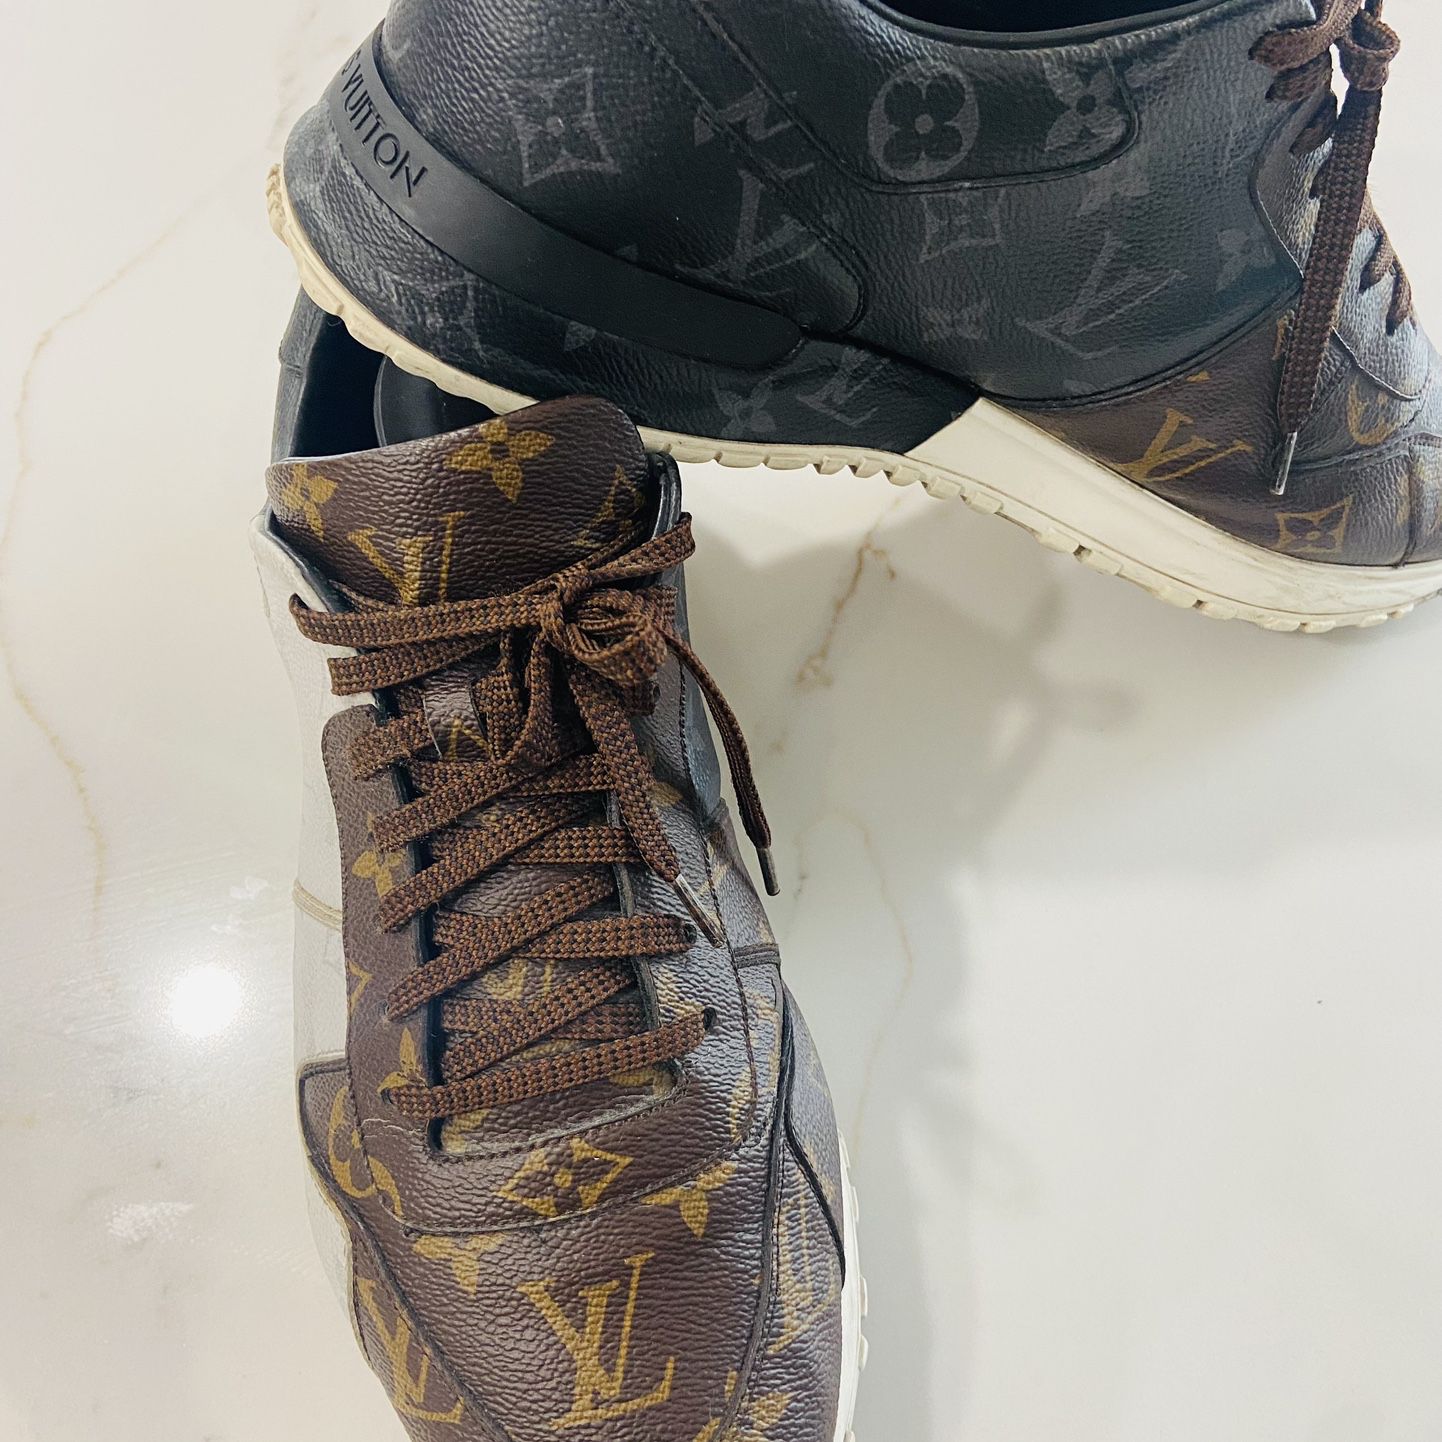 Rose gold Louis Vuitton shoes for Sale in Snover, MI - OfferUp